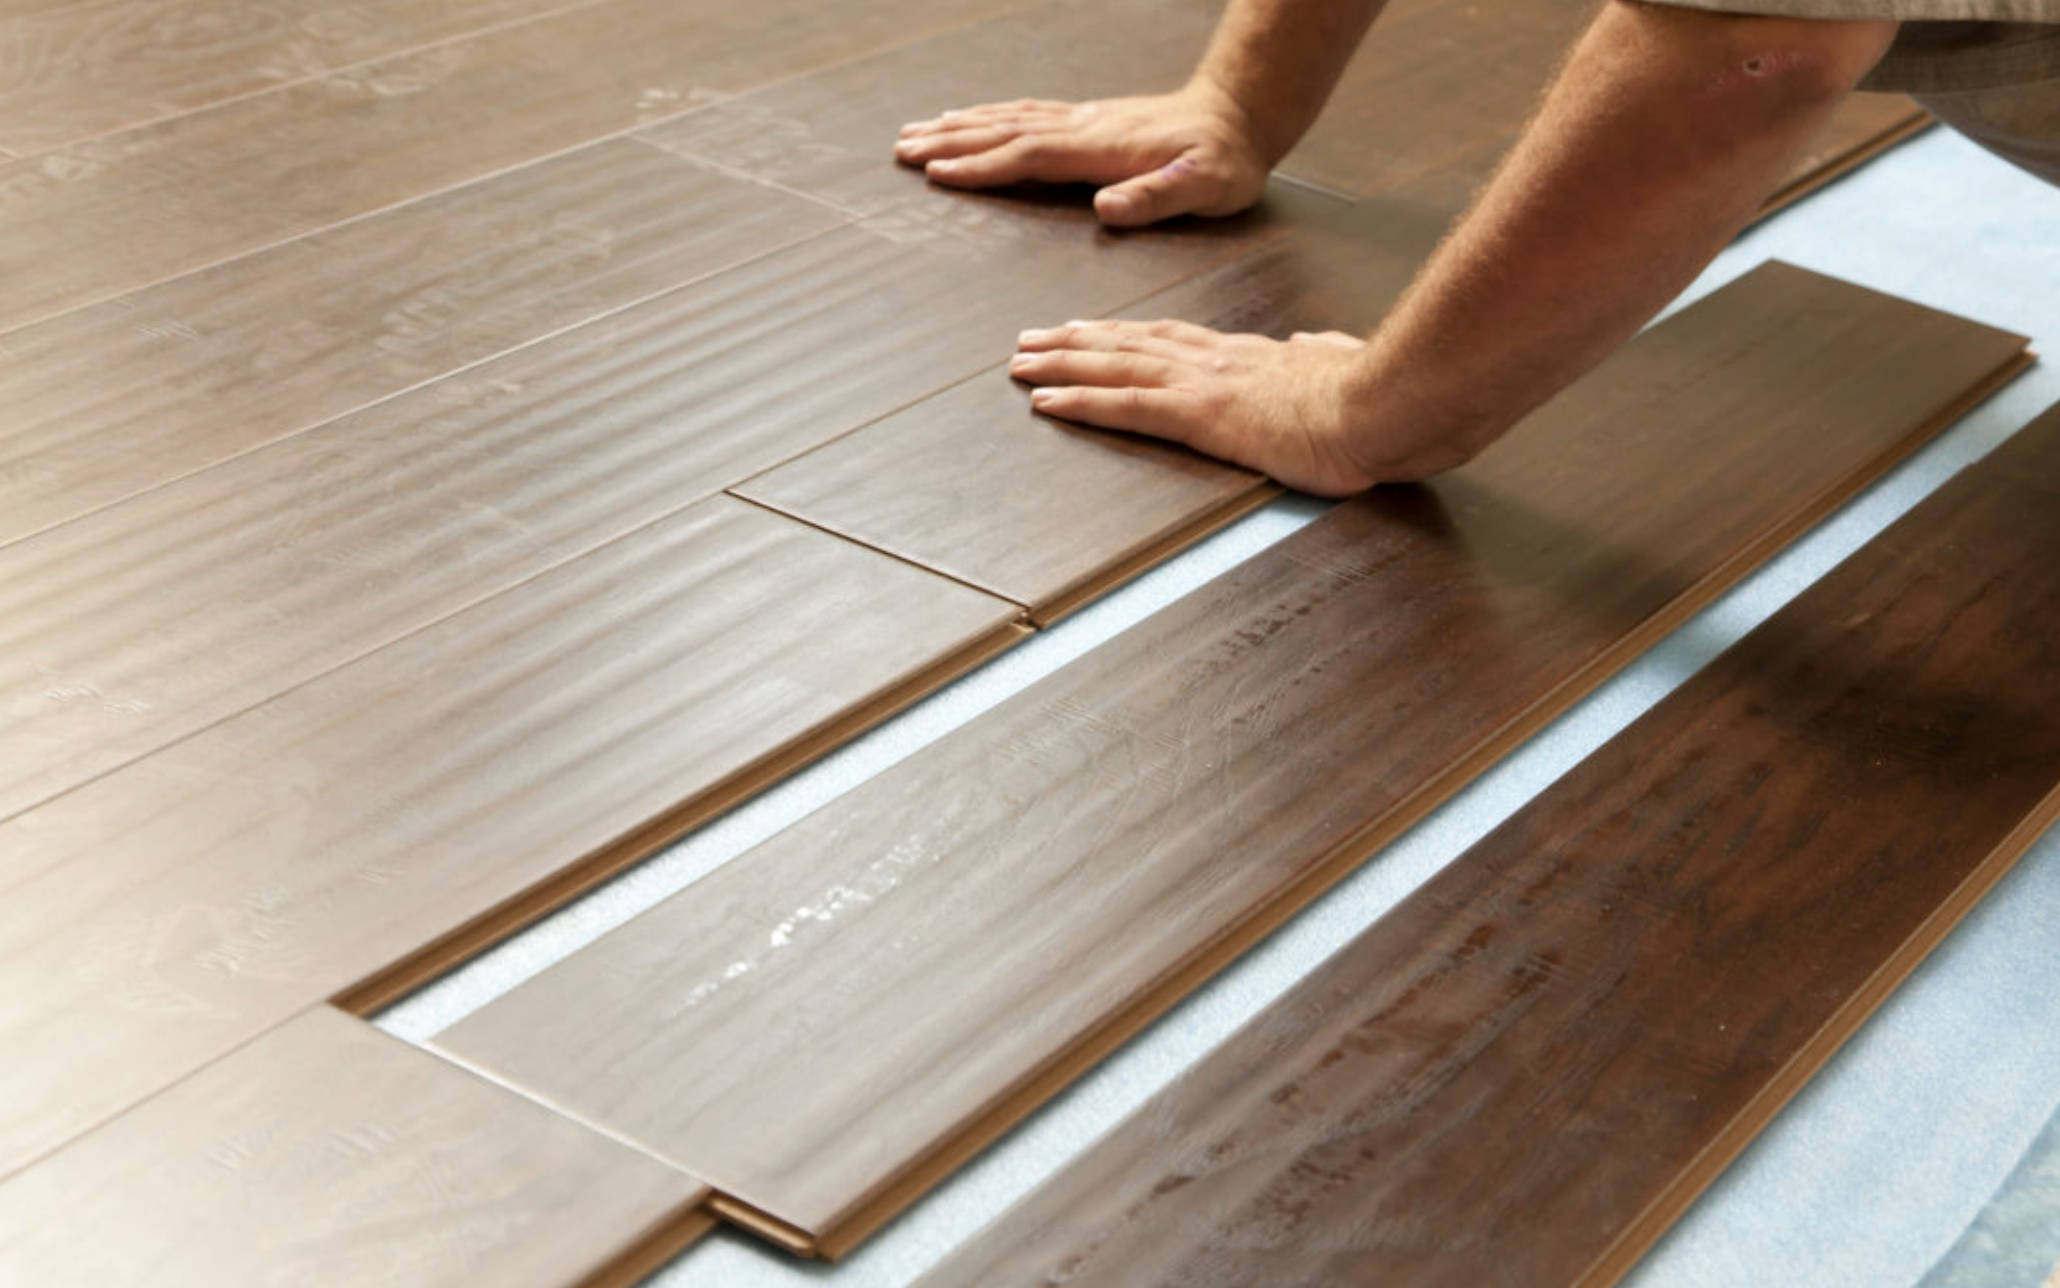 Problems with laminate flooring